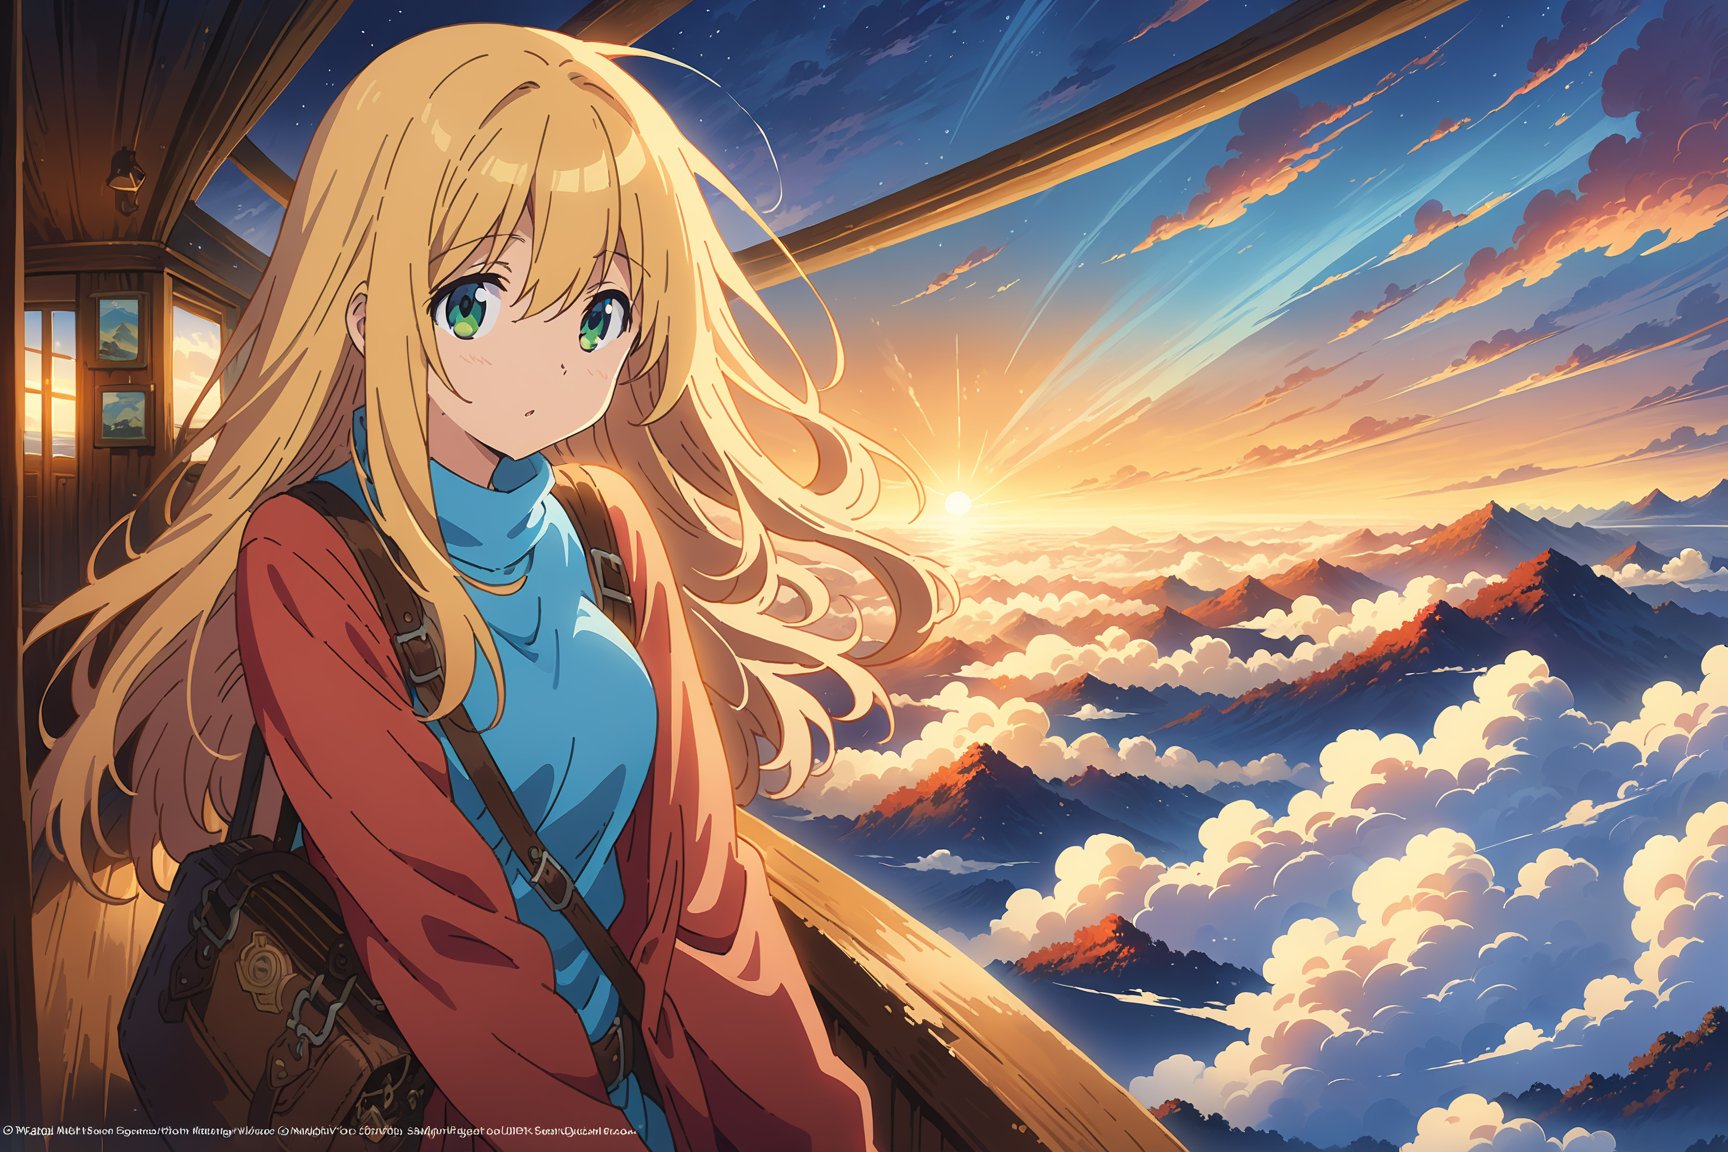 (blonde) woman traveling on a boat through sea of (clouds), long hair,  (greeneyes), (lipstick:0.5), 

journey, air, (morning:0.6), sky boat,

sky blue / light-orange / white / cerulean / amber / apricot / azure / indigo, outline,

(((Masterpiece, best quality, 2D anime), HDR, artstation), sharp visual, extra details),

dreamy, hopeful atmosphere,